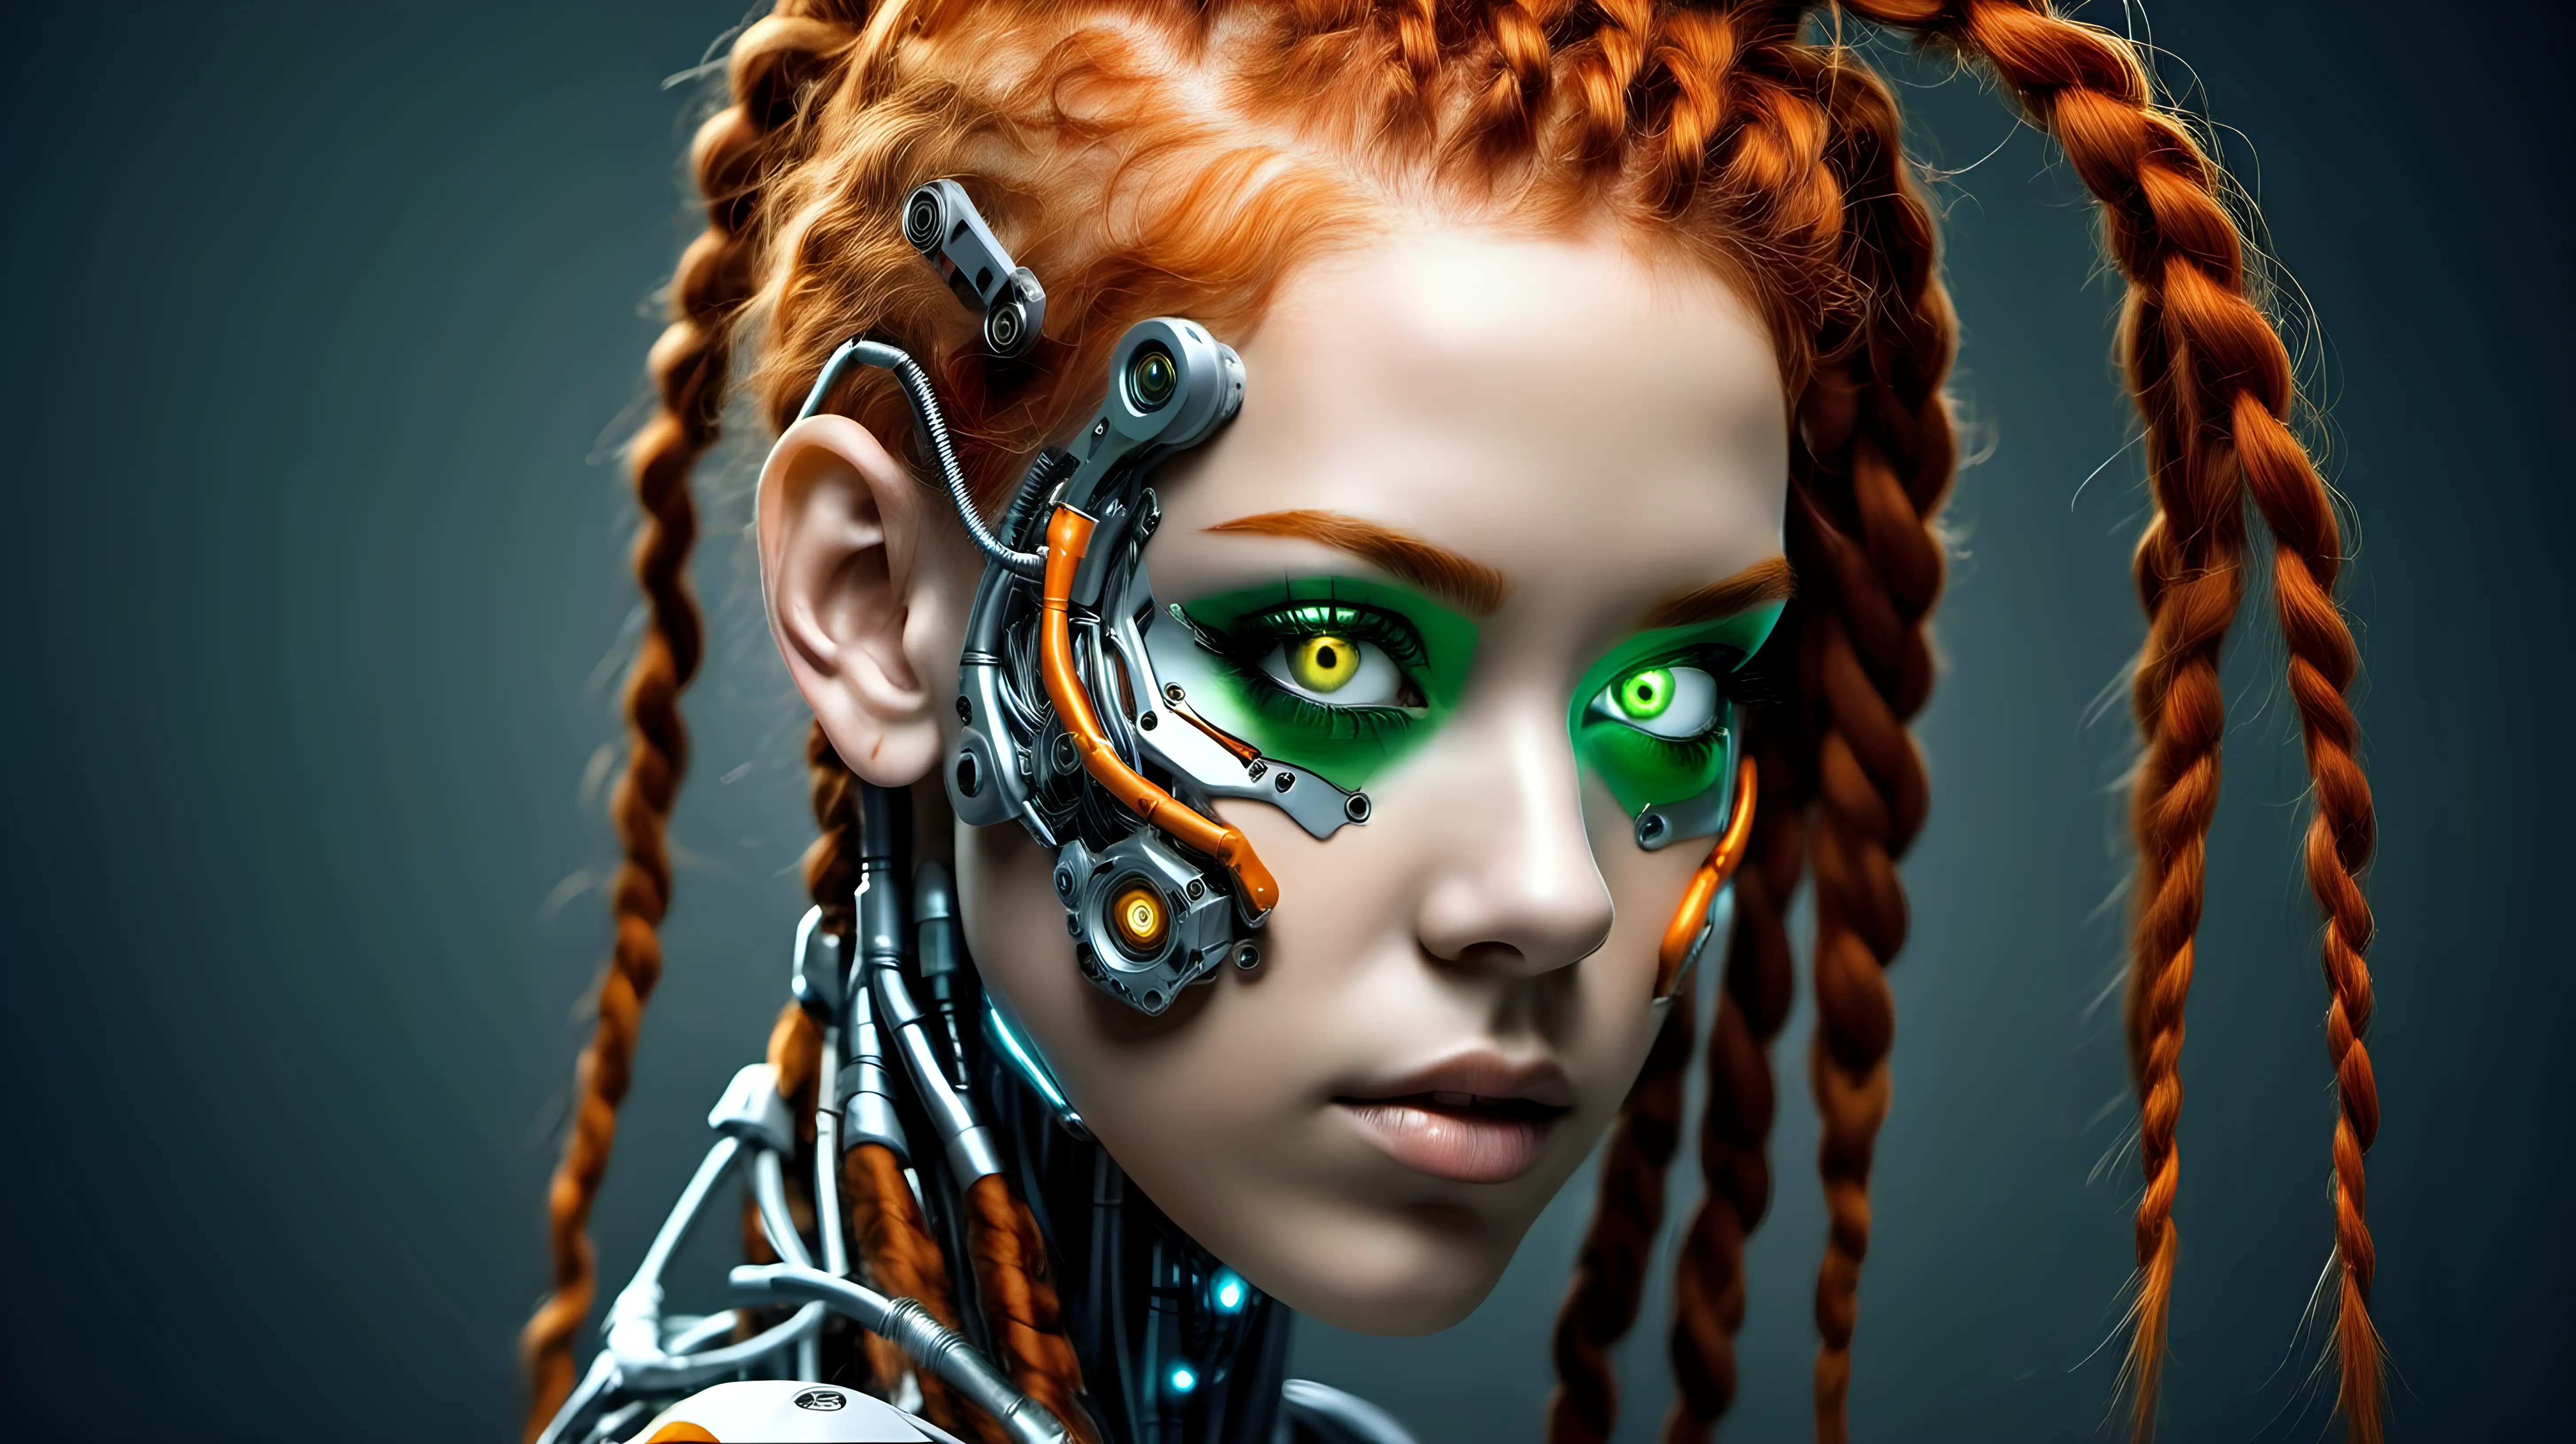 Cyborg woman, 18 years old. She has a cyborg face, but she is extremely beautiful. Orange wild hair, braids, green eyes. 